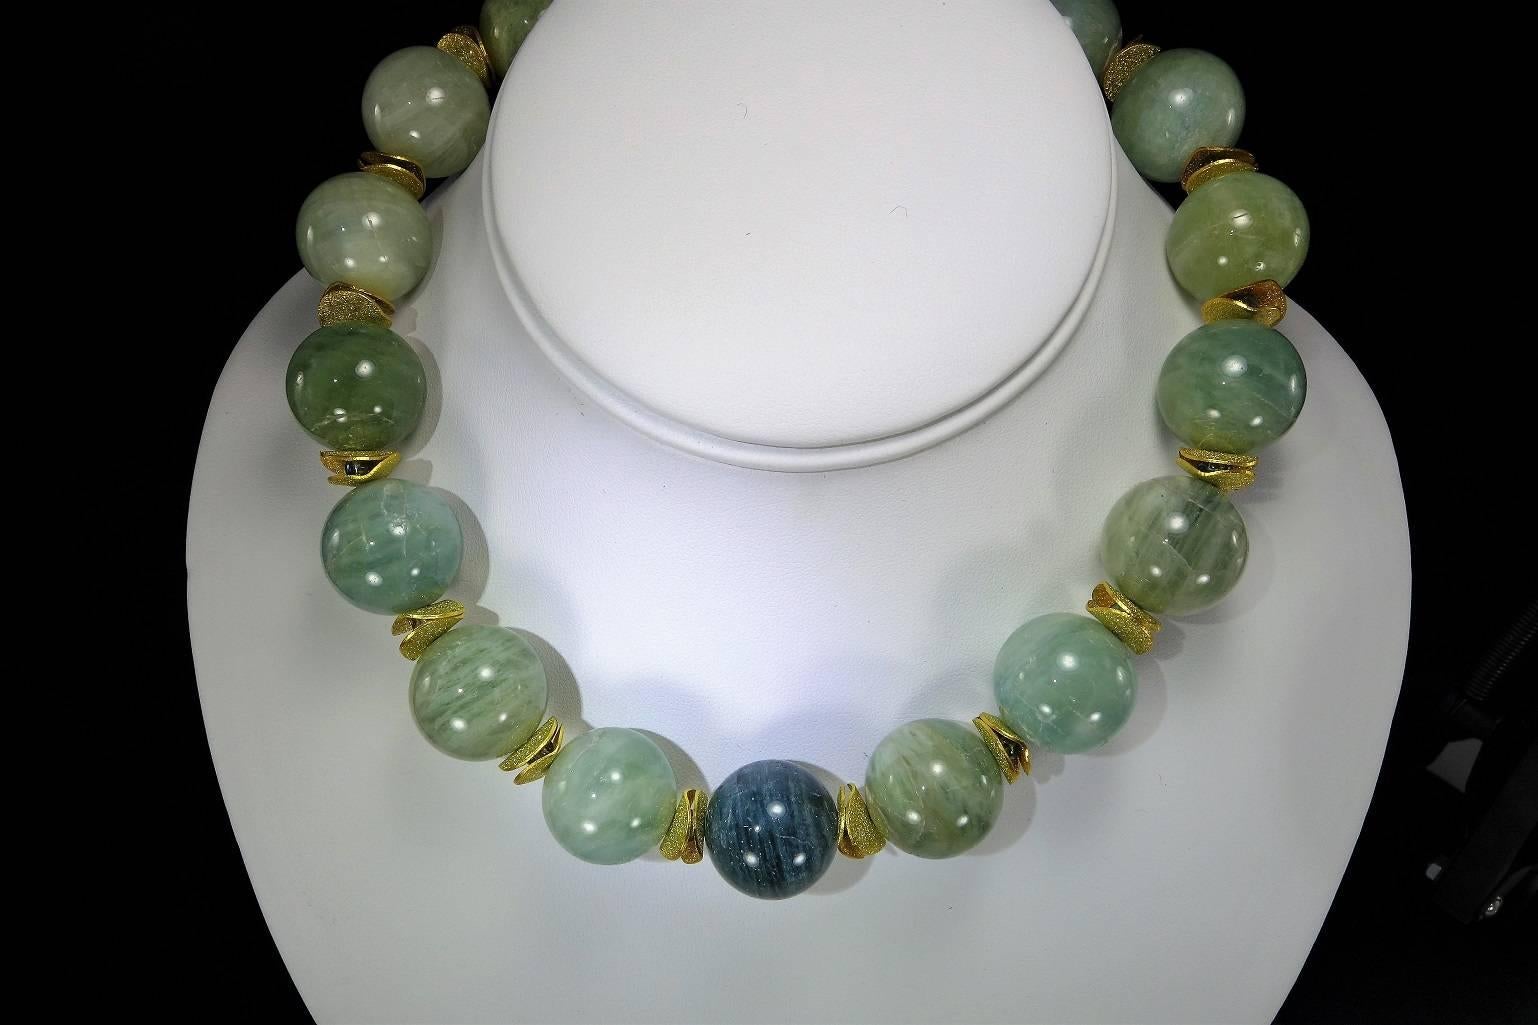 Glowing, Large Spheres of Polished Opaque Aquamarine Choker  March Birthstone 2